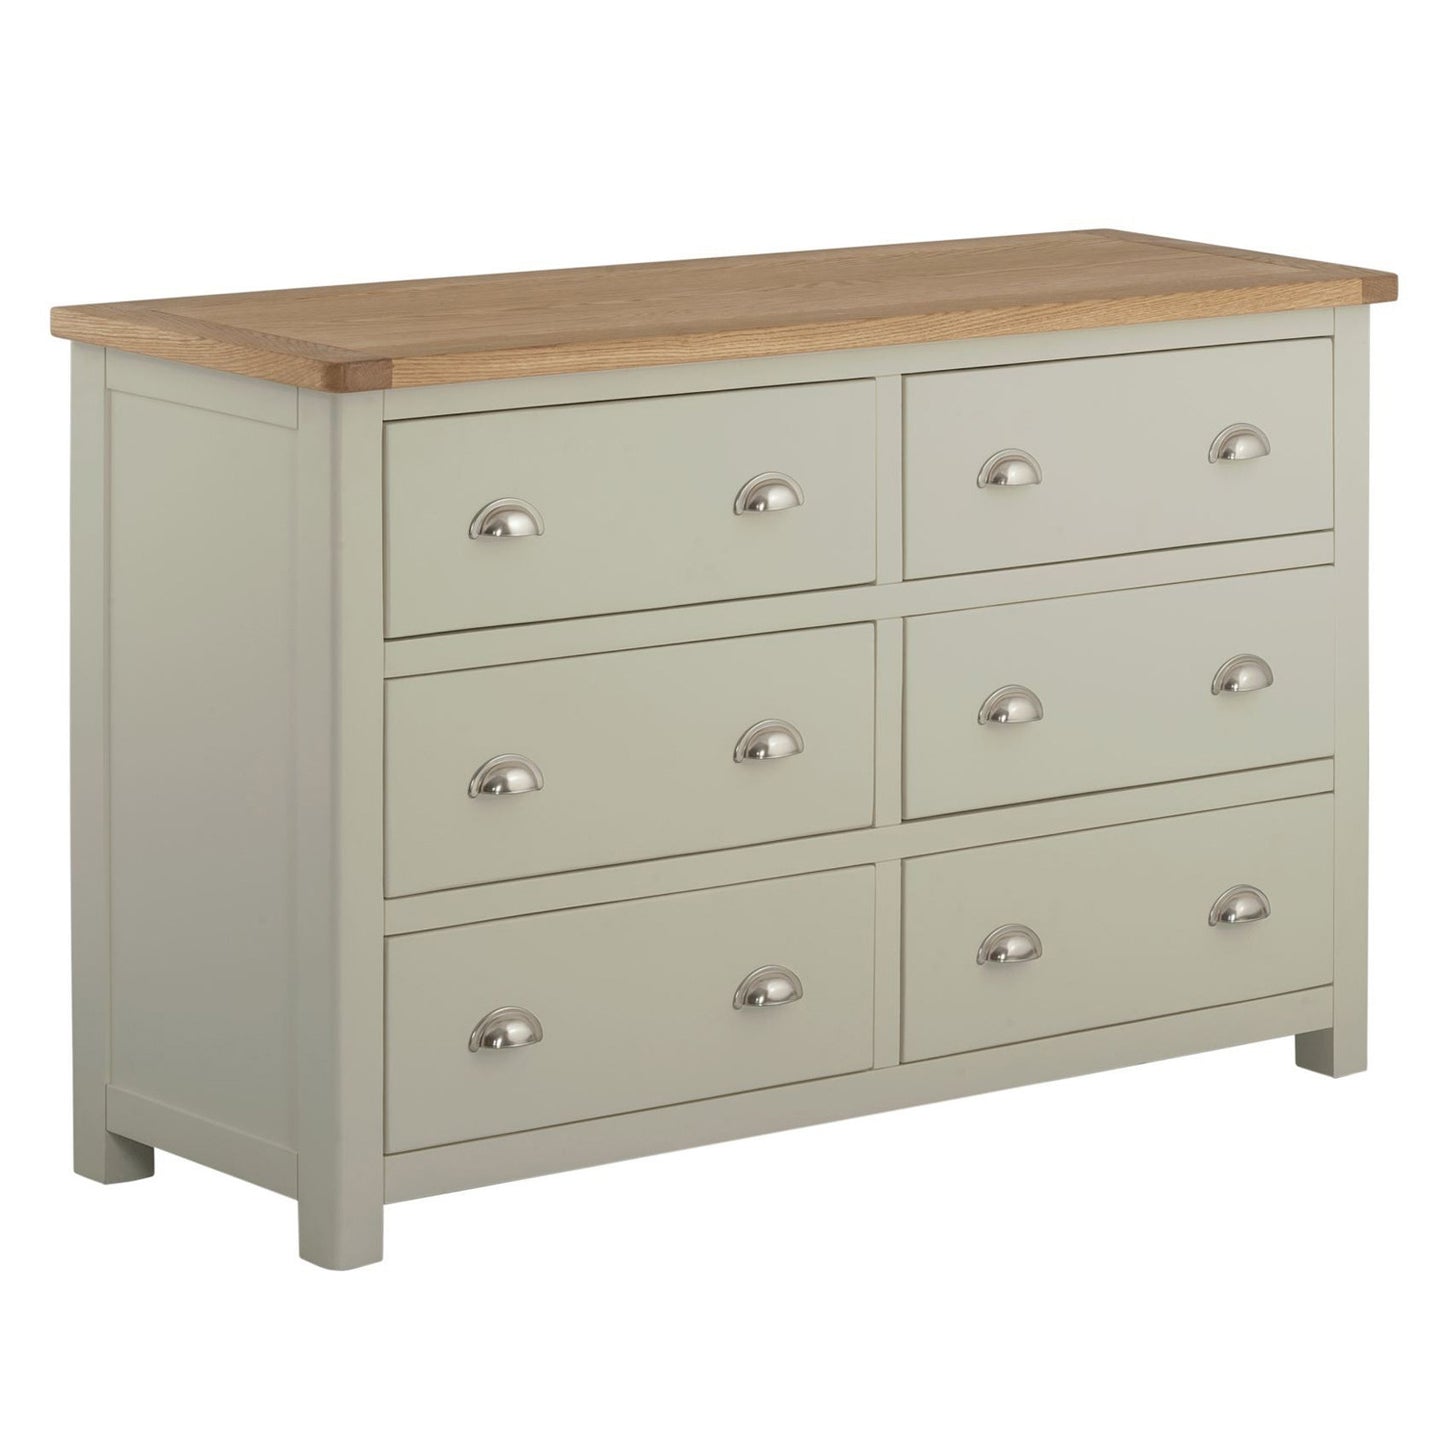 Todenham Oak & Painted Chest of Drawers - 6 Drawer Wide Chest - Better Furniture Norwich & Great Yarmouth